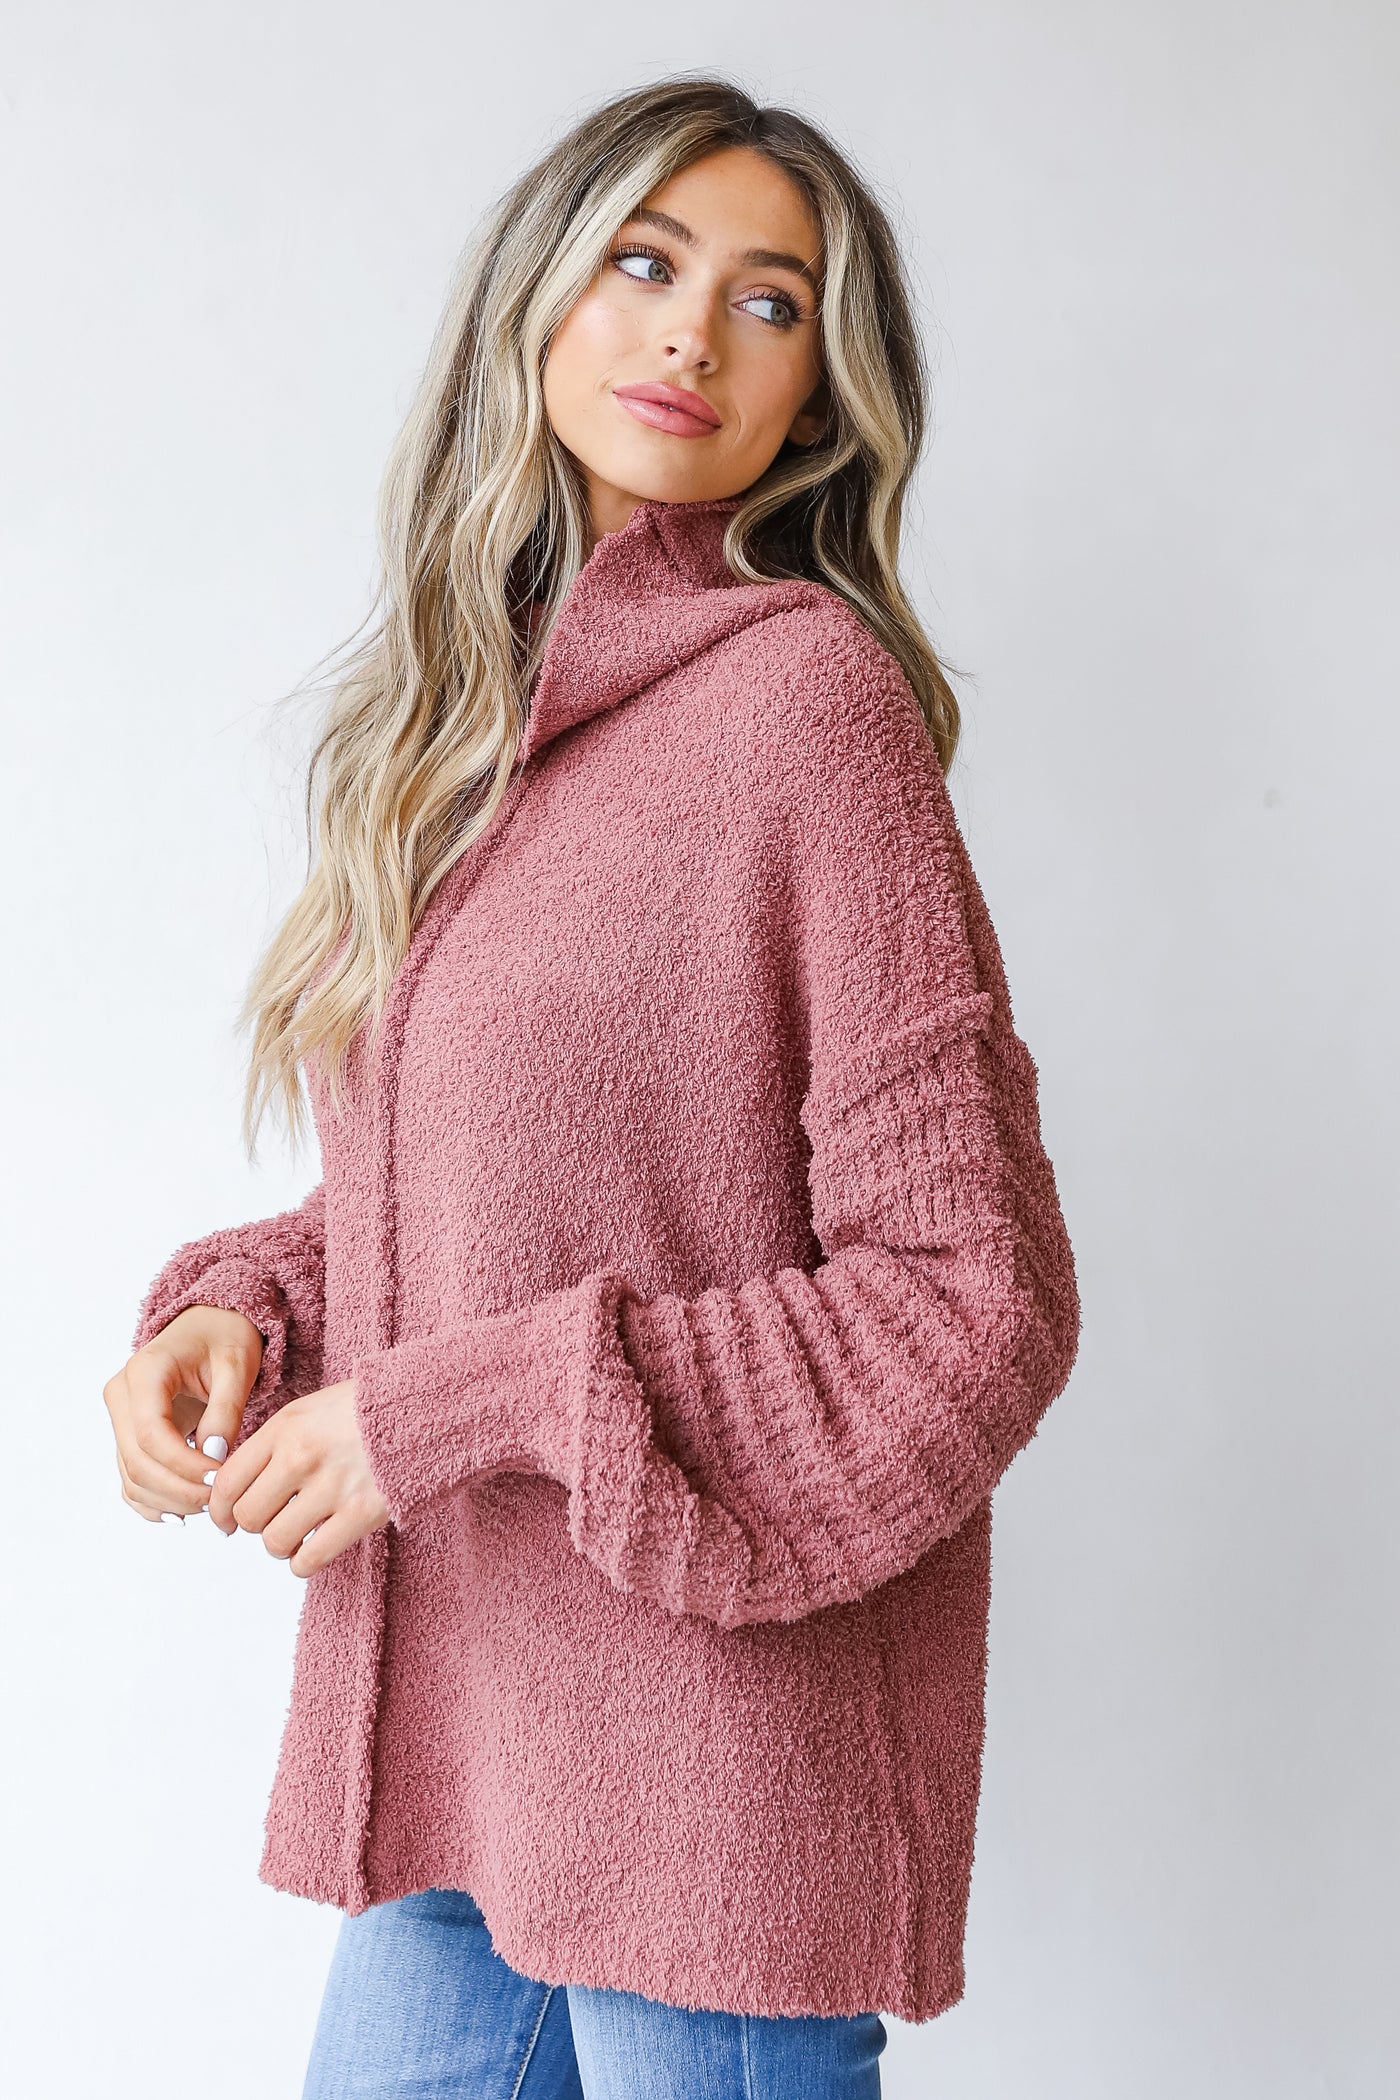 Fuzzy Knit Sweater in mauve side view